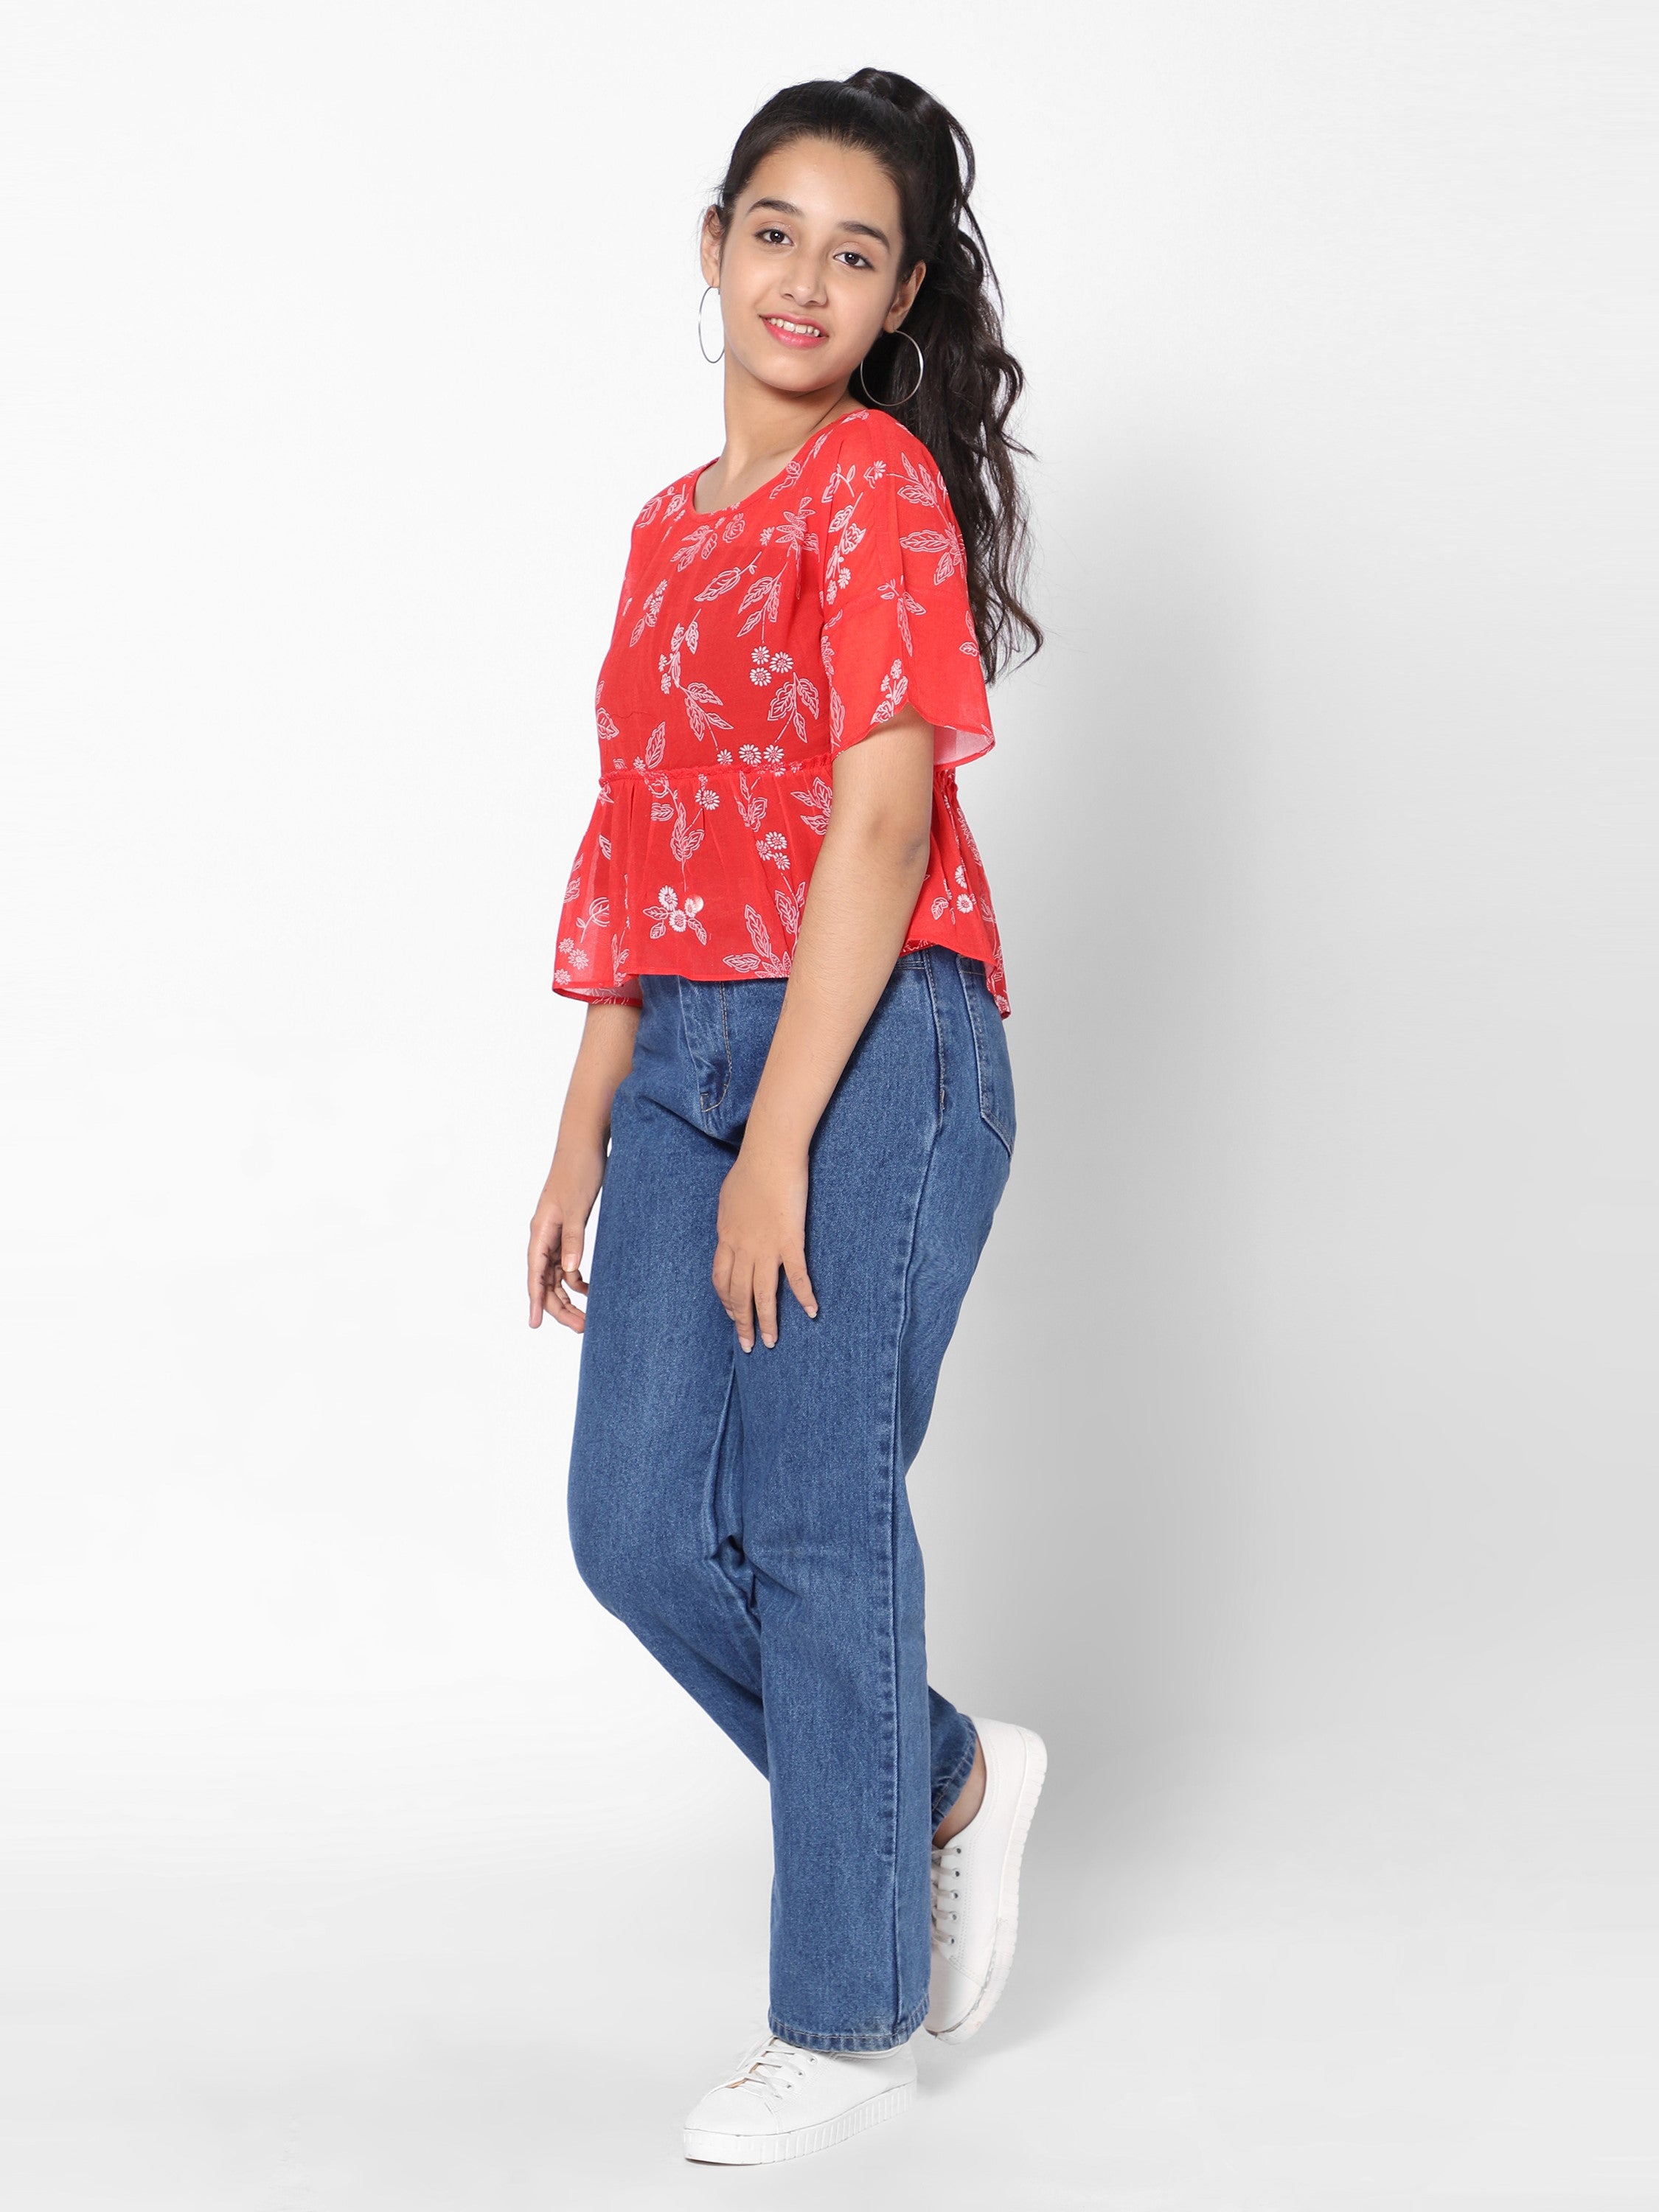 Girls Frill Crop Top- Red Floral Printed